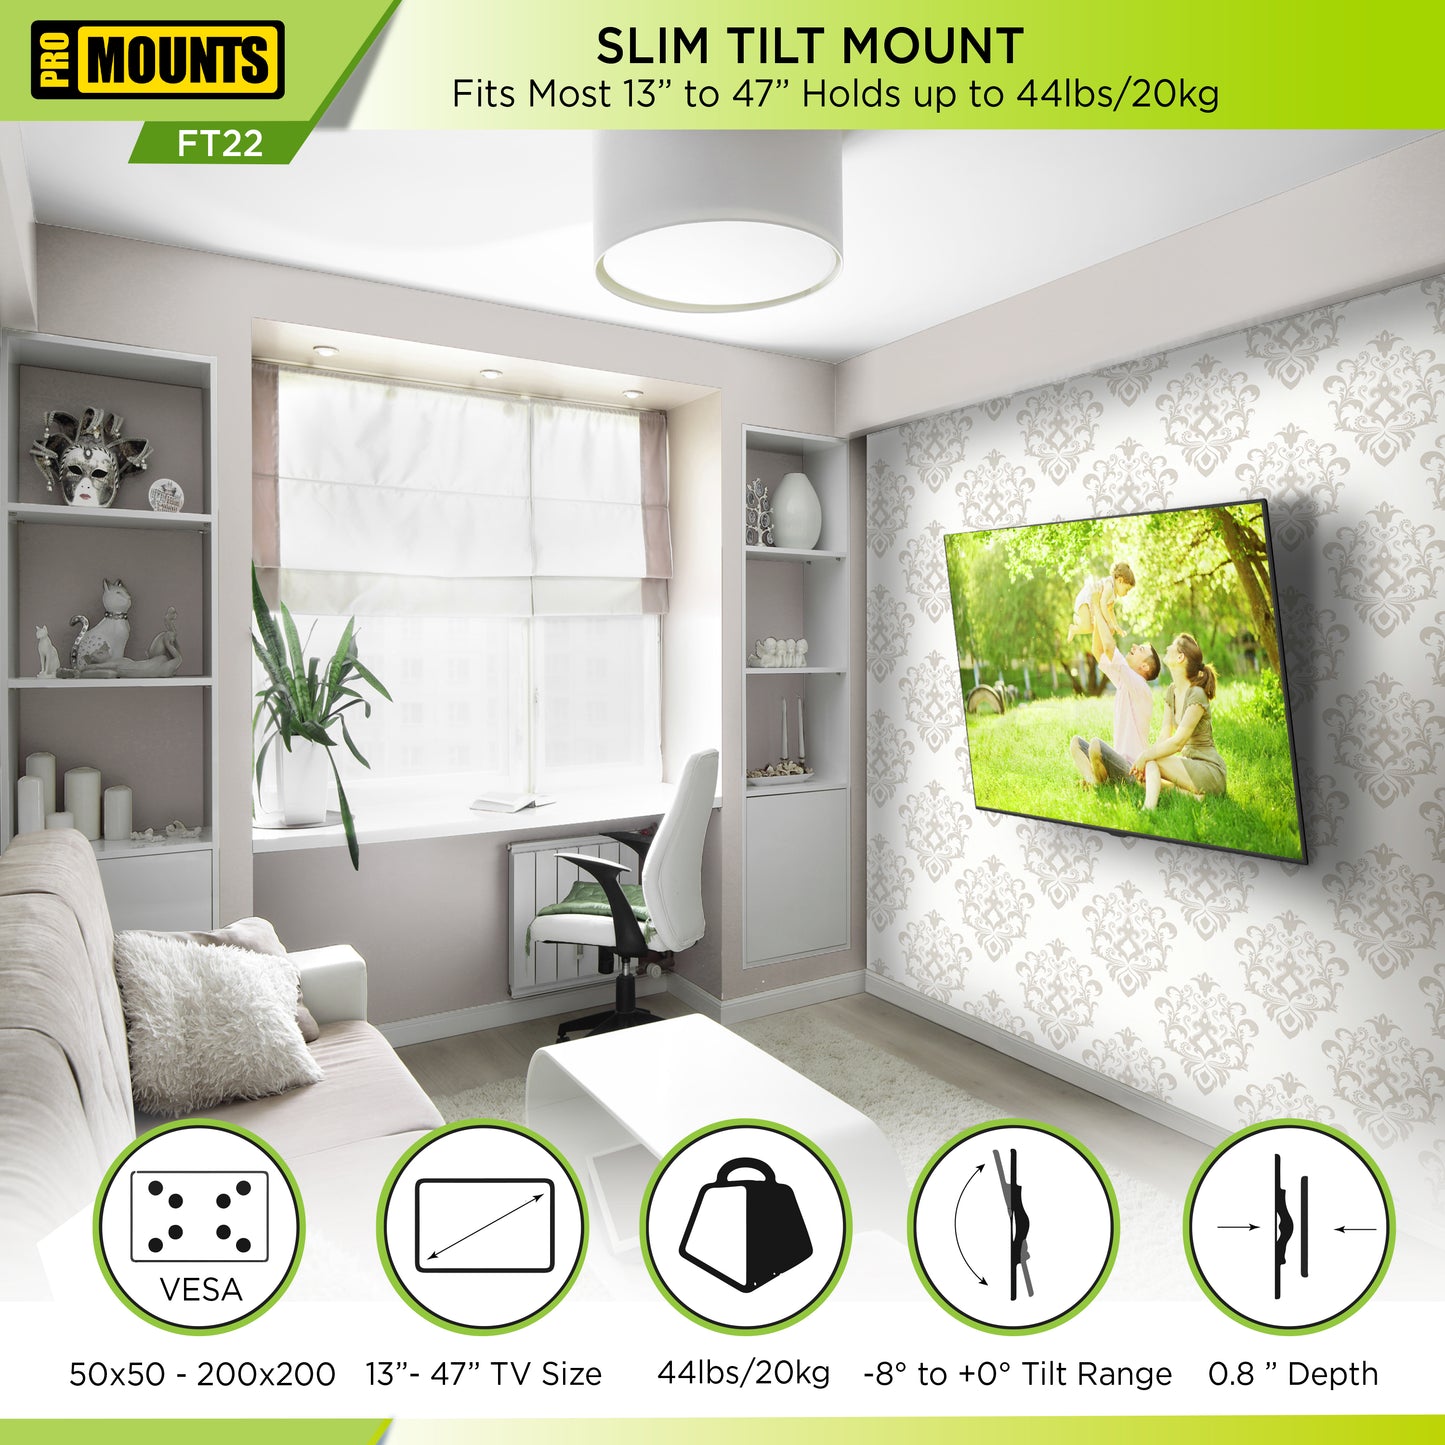 ProMounts Tilting TV Wall Mount for 13" to 47" TVs, Holds up to 44lbs (FT22)